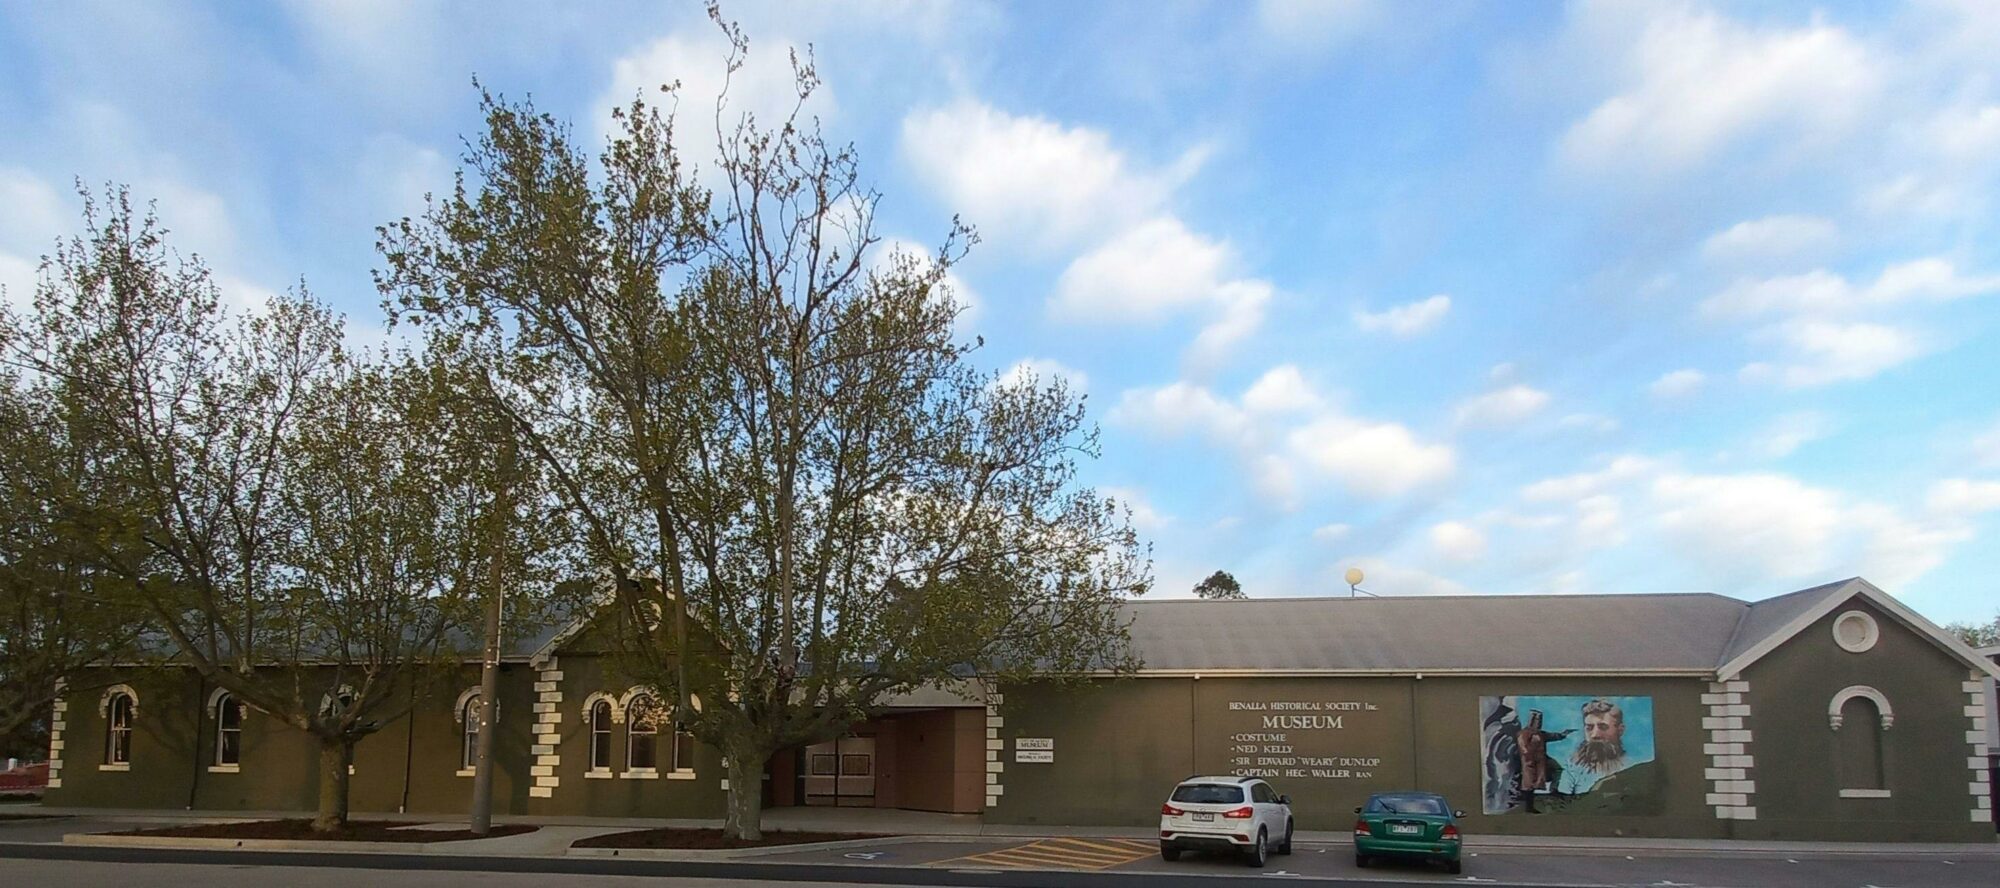 Outside view of the Benalla Visitor Information Centre